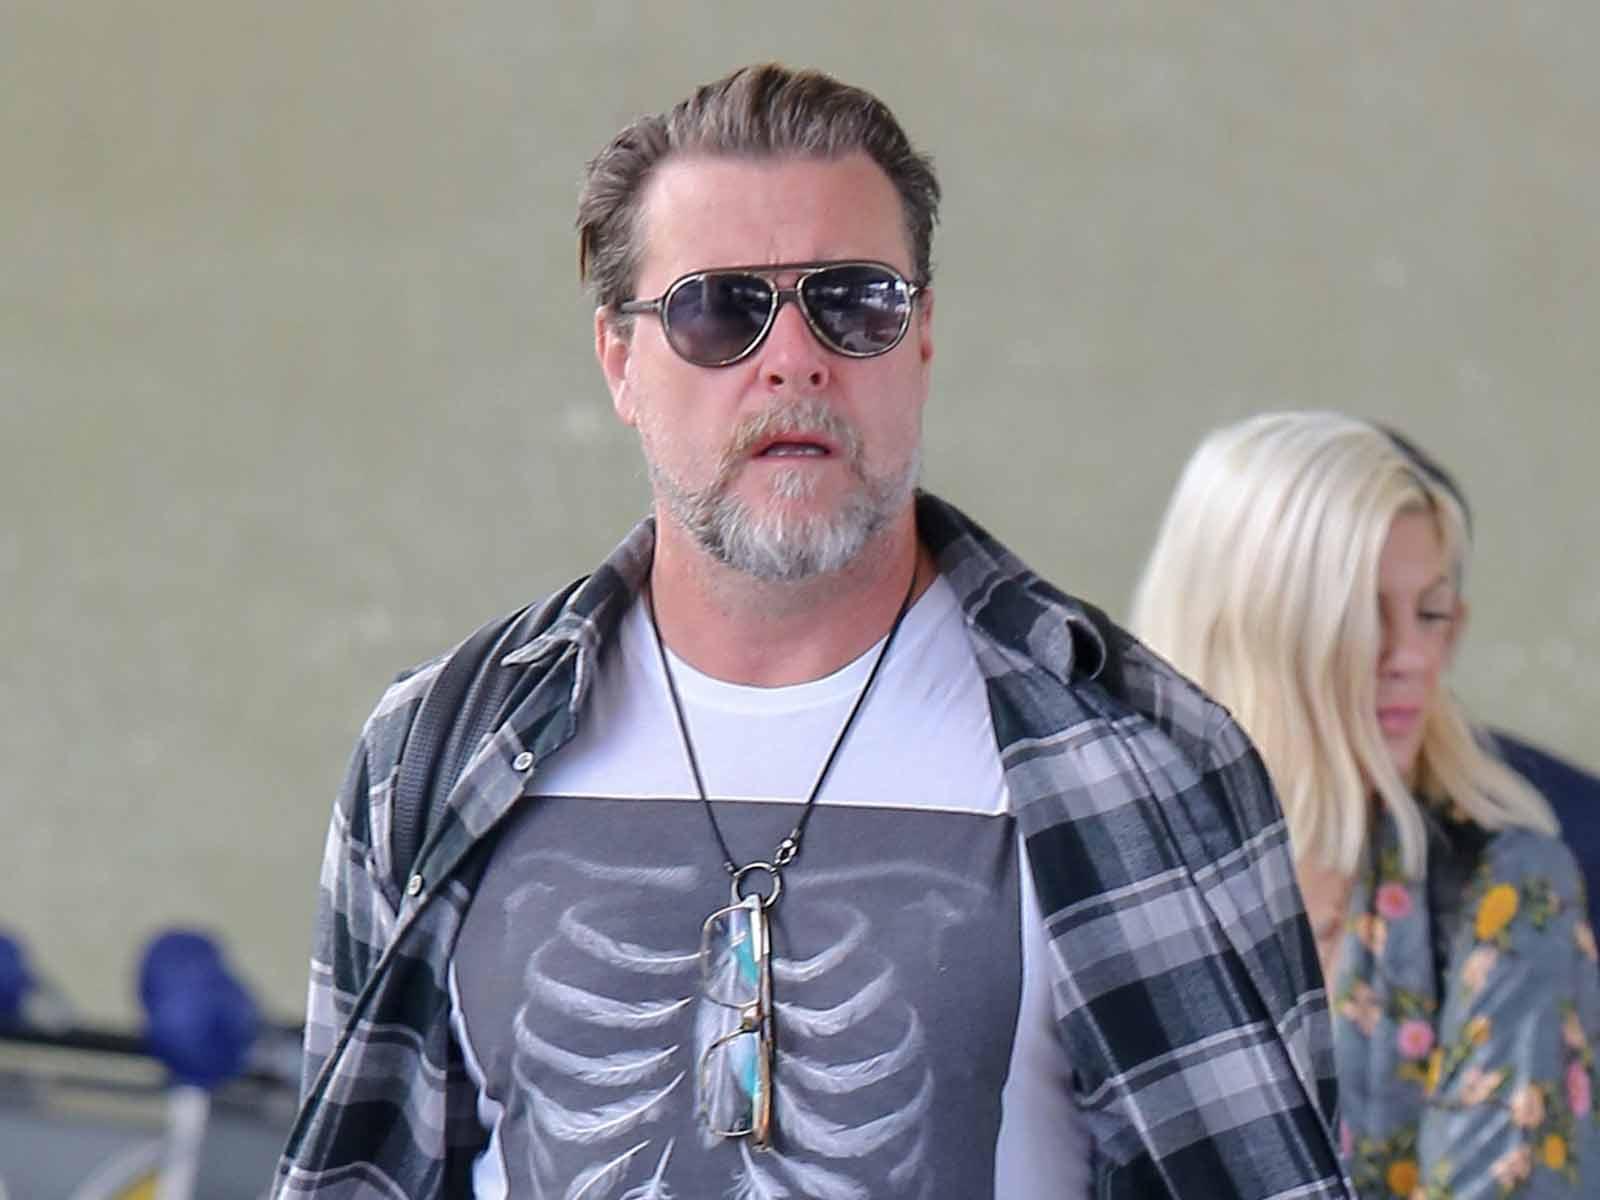 Dean McDermott’s Ex Says He’s Behind on Child Support Again, Slams His Lavish Lifestyle